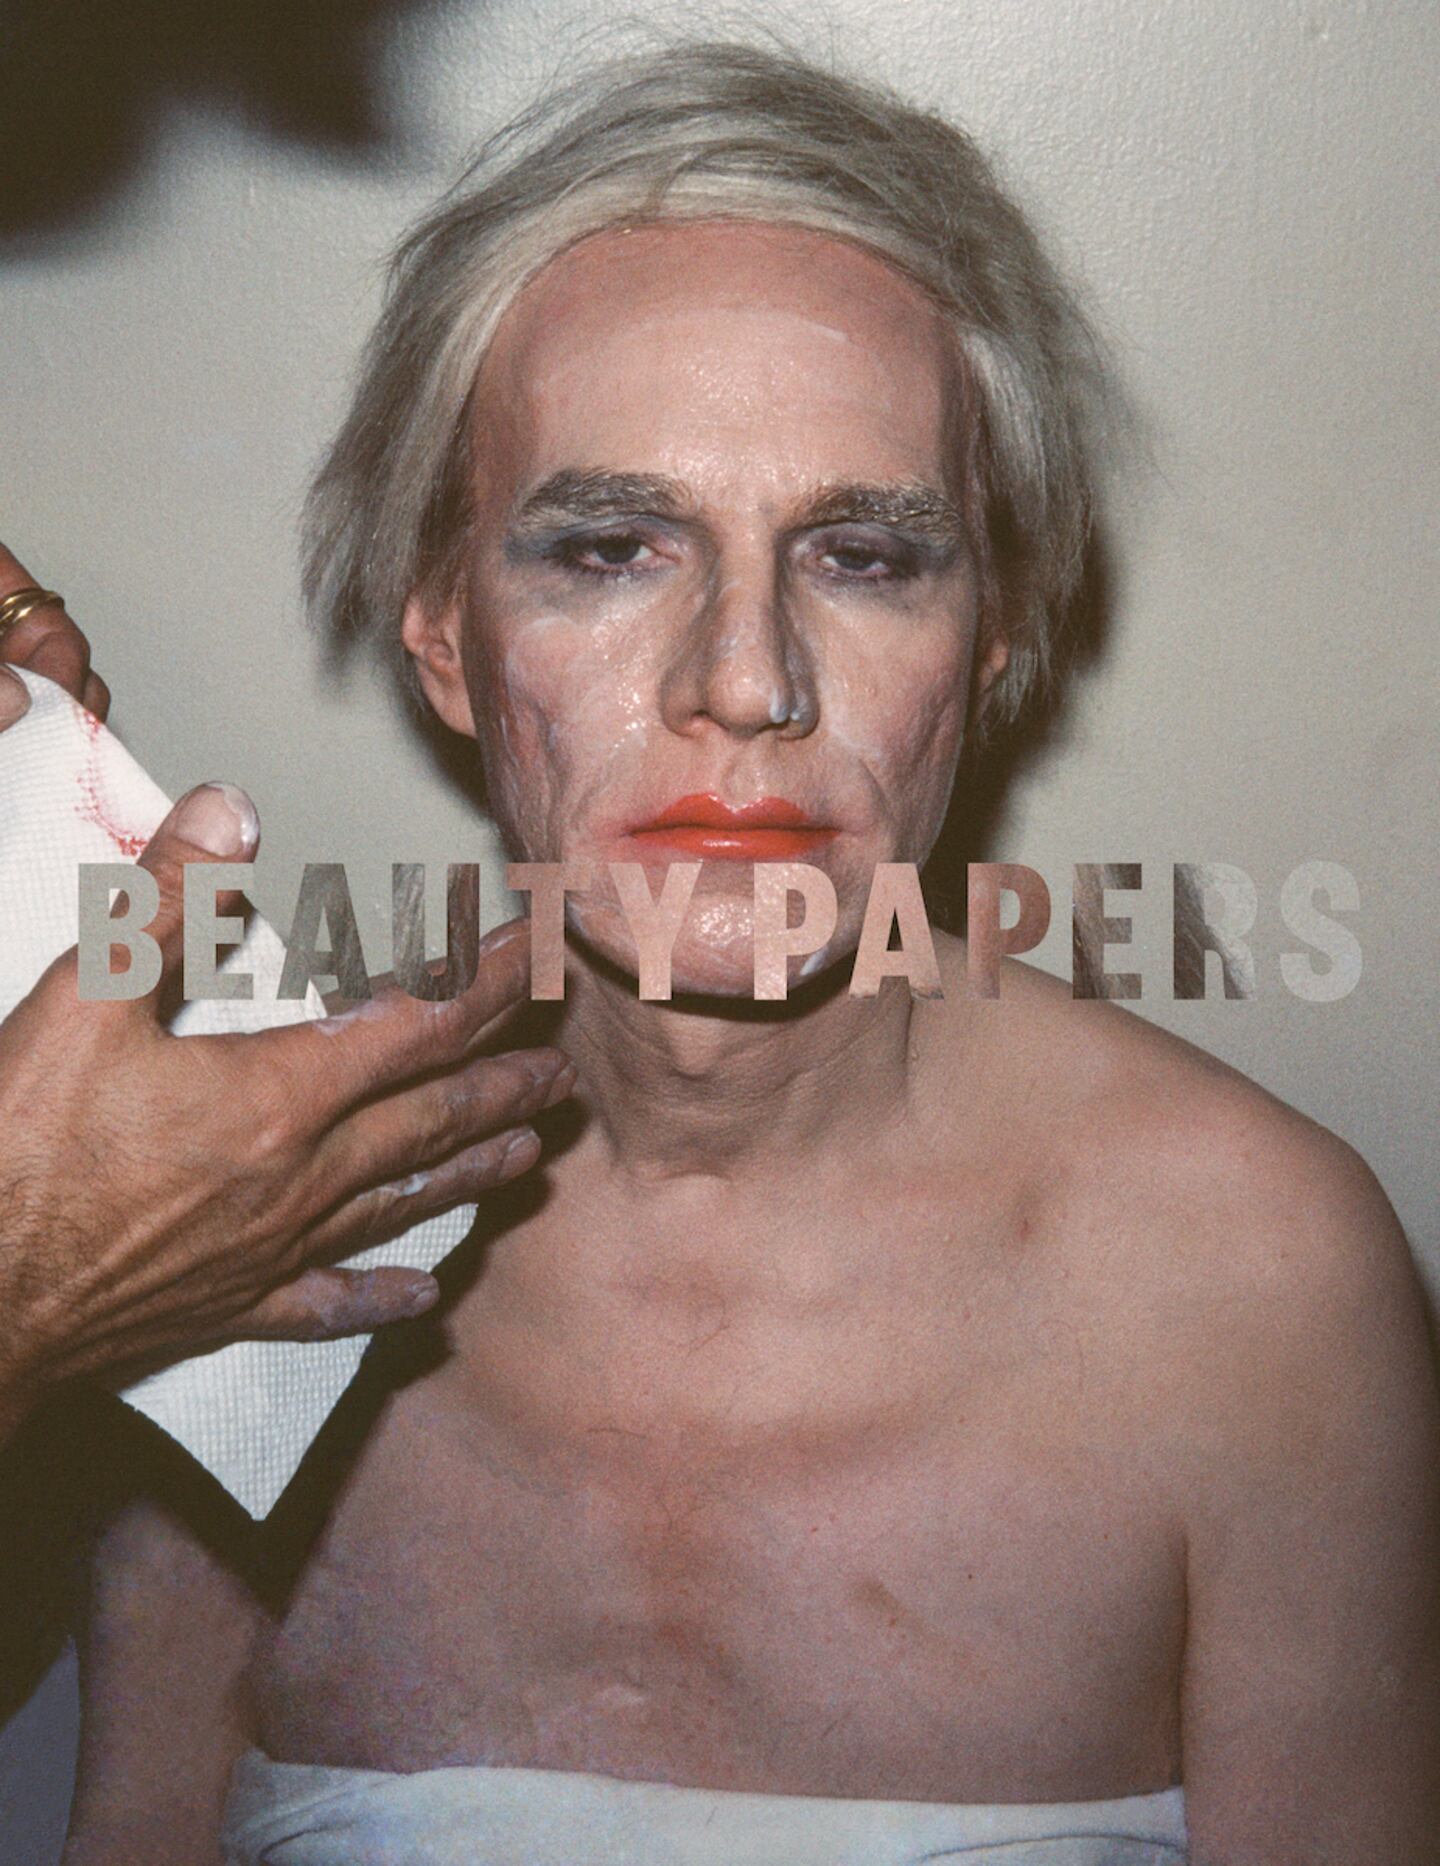 A cover for Issue 11 of Beauty Papers shows a previously unseen photo of Andy Warhol having his drag makeup removed.